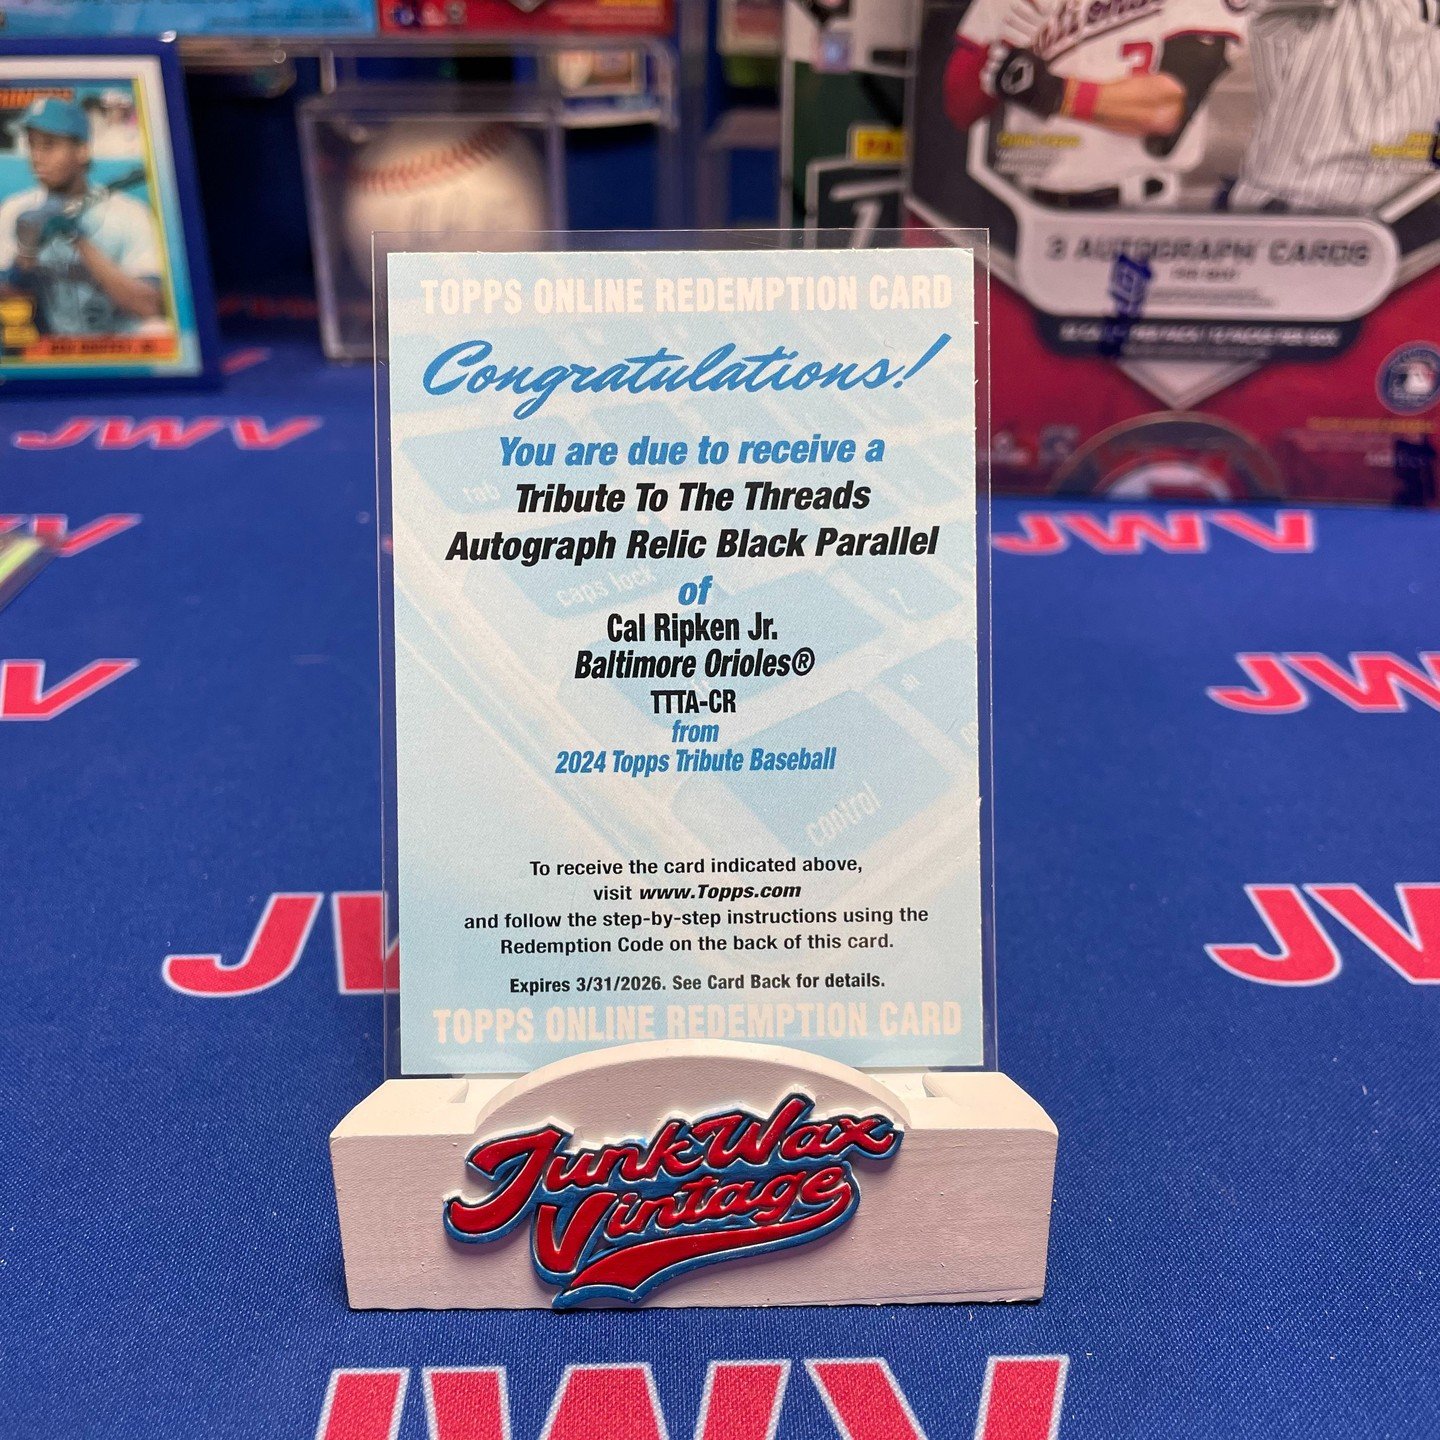 Guess what just landed?! 🌟 Our 2024 Topps Tribute Baseball Cal Ripken Jr. 1/1 redemption card has officially arrived and it's nothing short of epic! 🎉 A massive shoutout to Jeff Branch for hitting this absolute banger!💥 

#junkwaxvintage #JWVCC #b